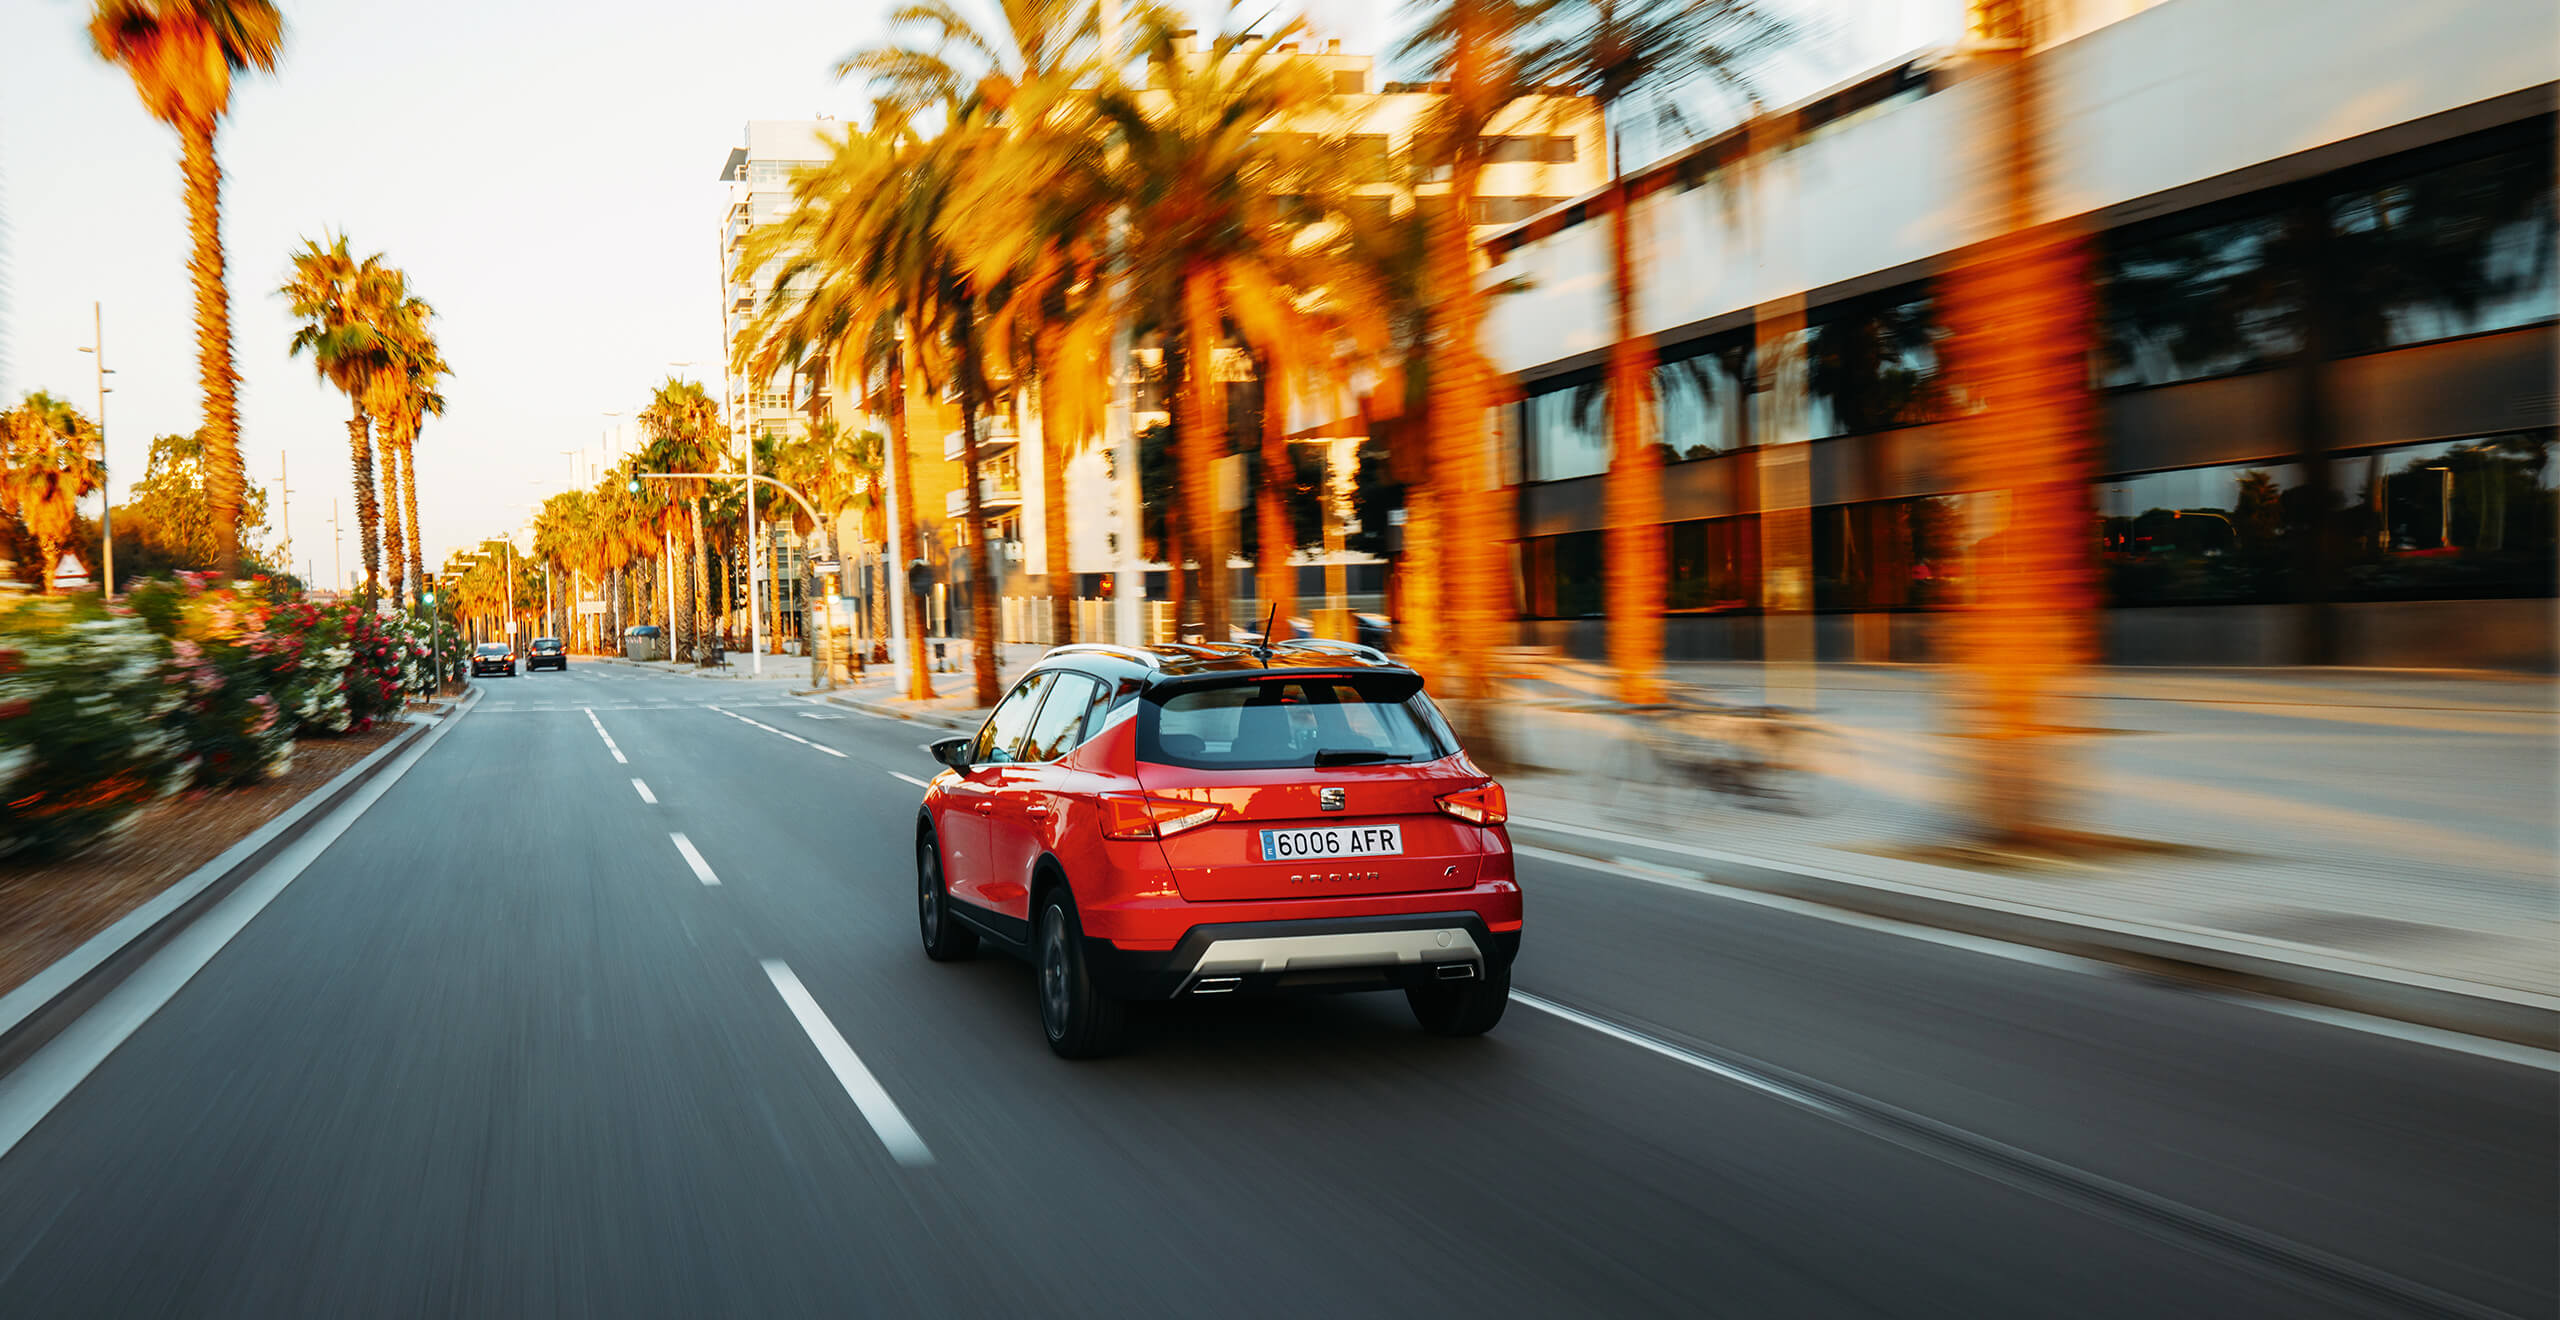 SEAT Arona crossover SUV driving in an urban street lined with palm trees